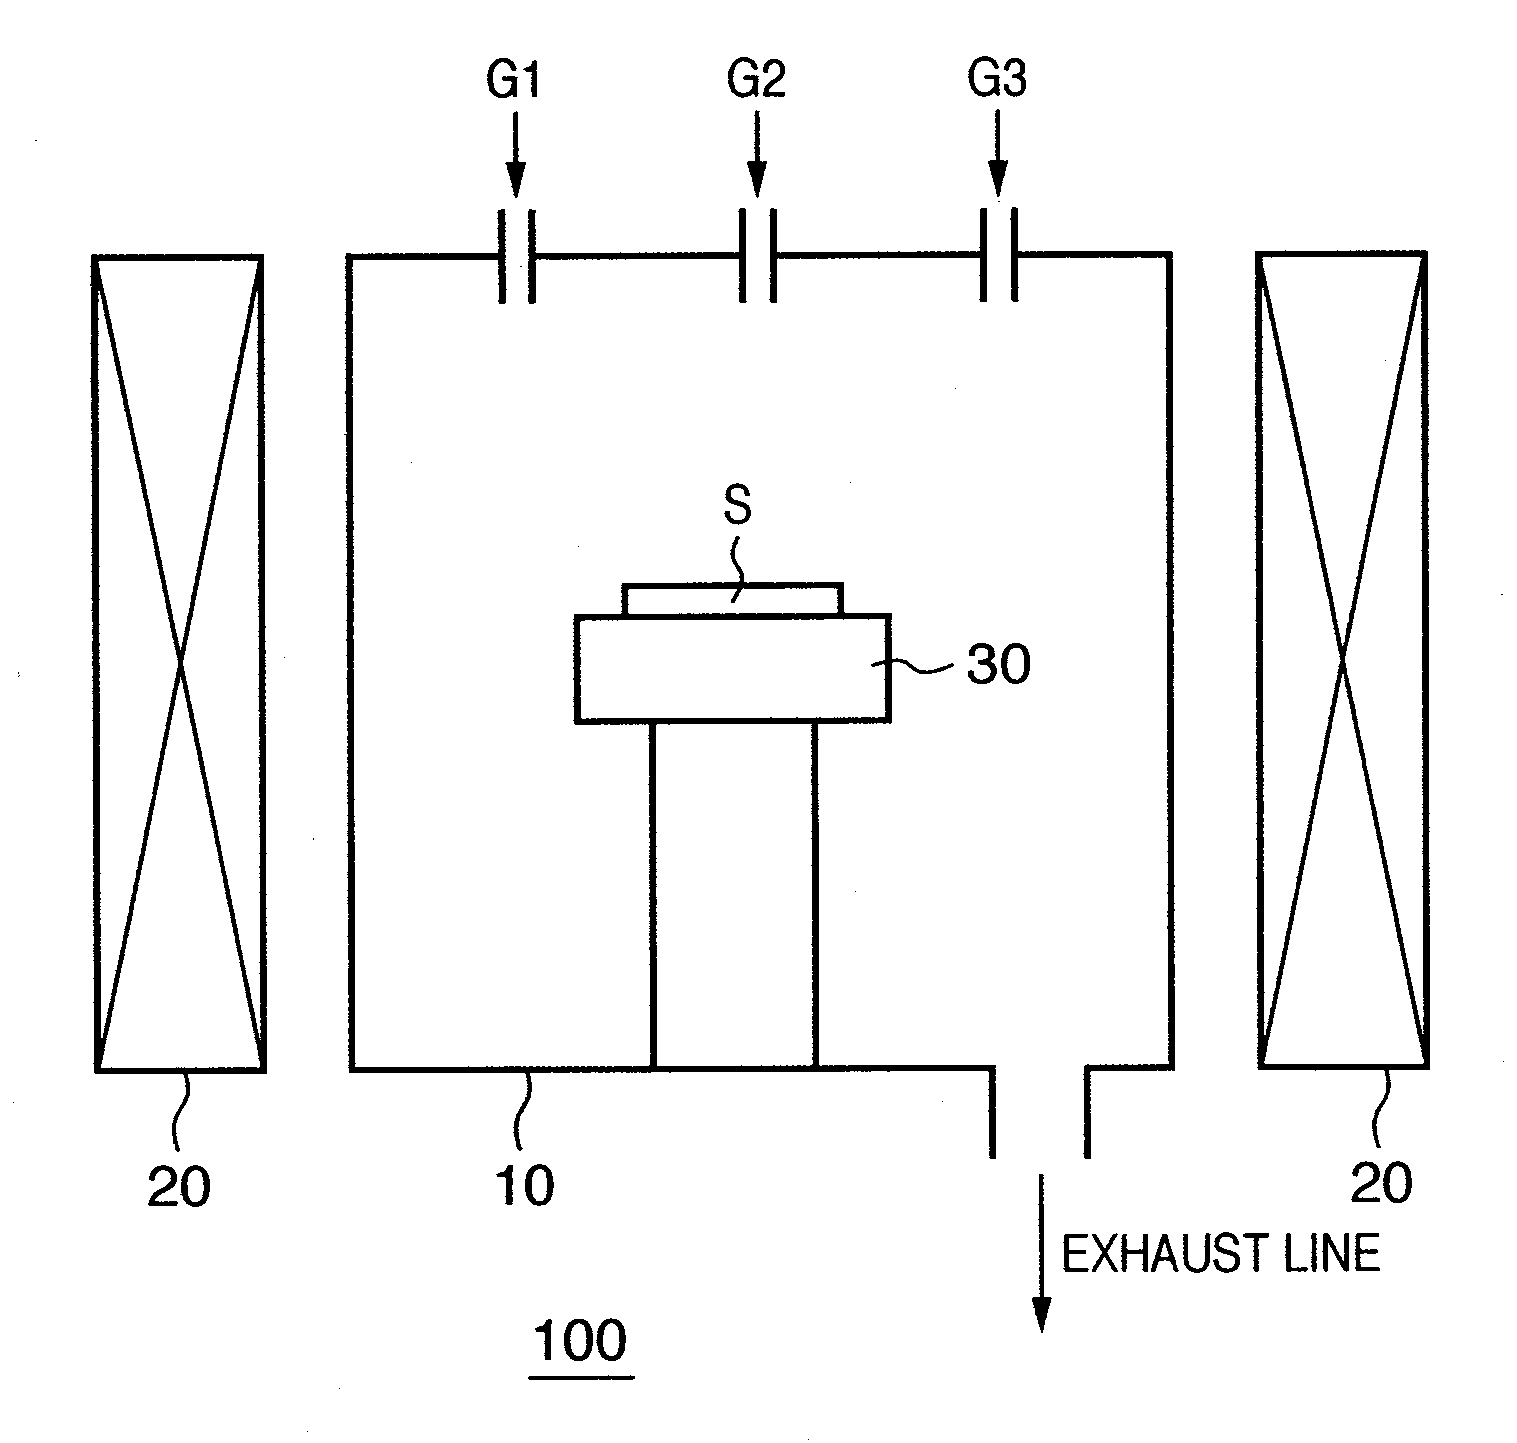 Gallium nitride-based material and method of manufacturing the same